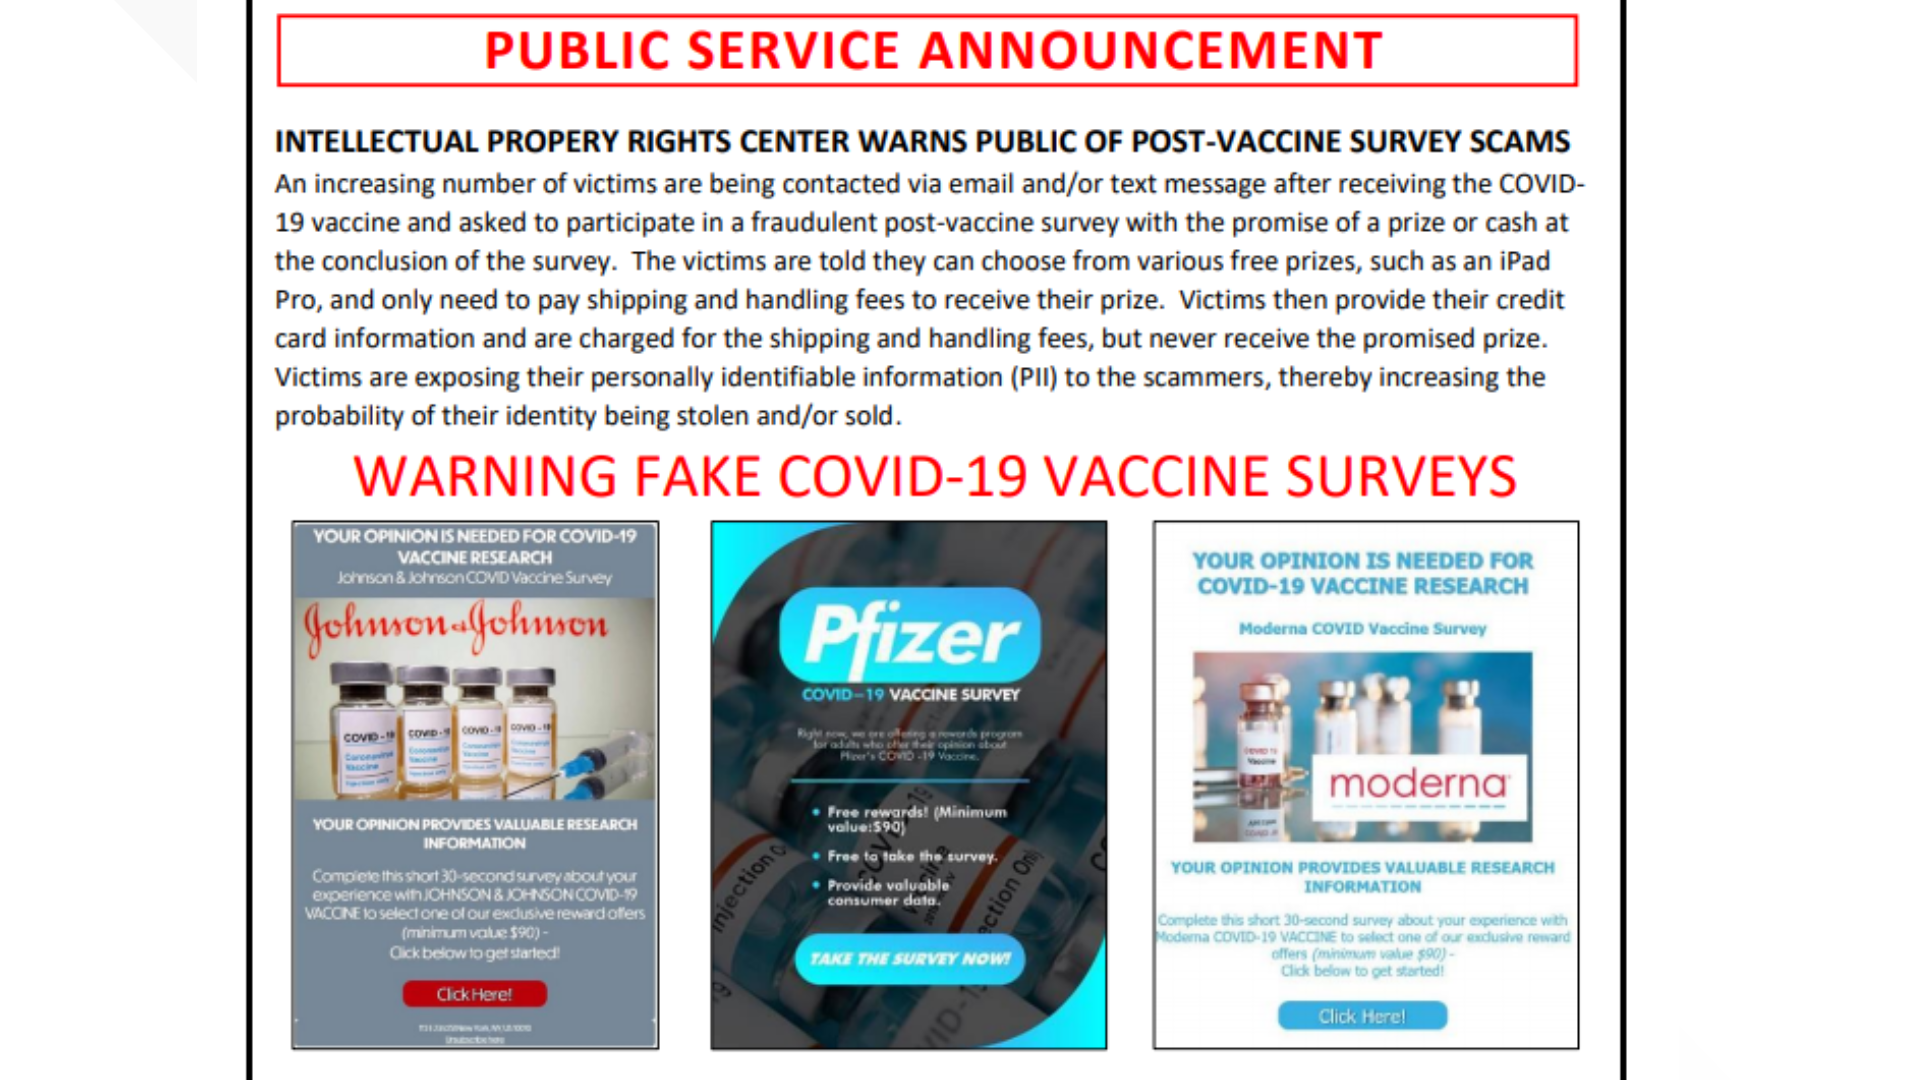 The FBI is warning about a post-vaccine survey phishing scam targeting people receiving the COVID-19 vaccine.